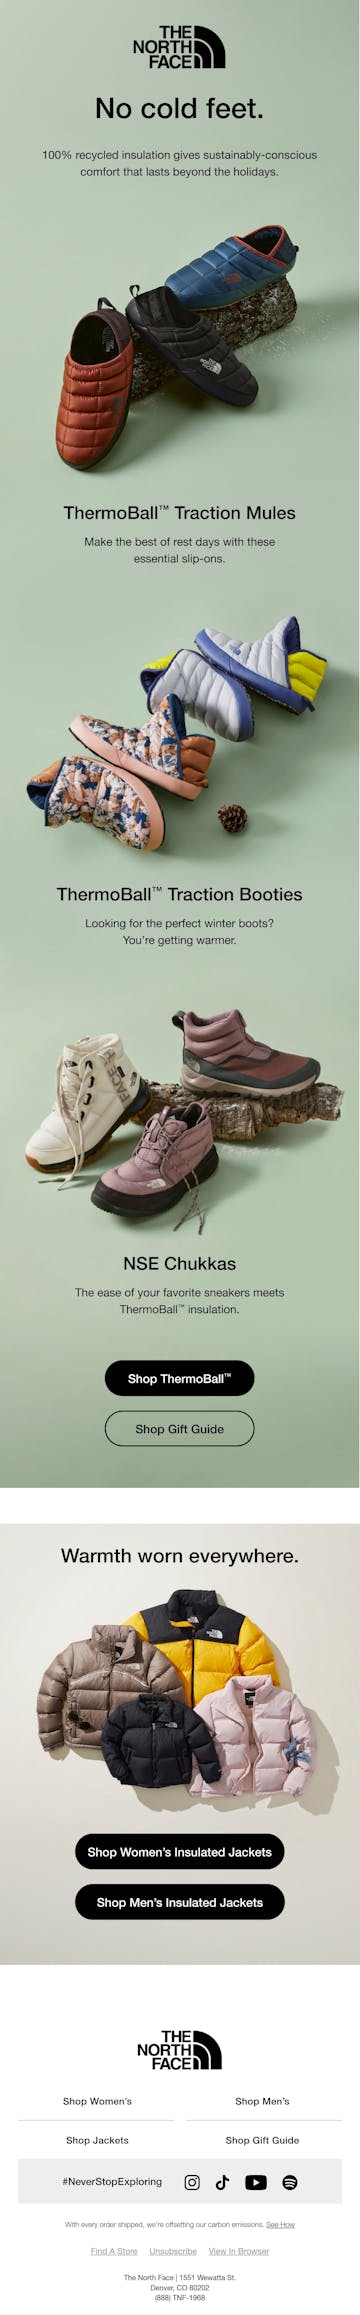 The North Face Email Design Thumbnail Preview